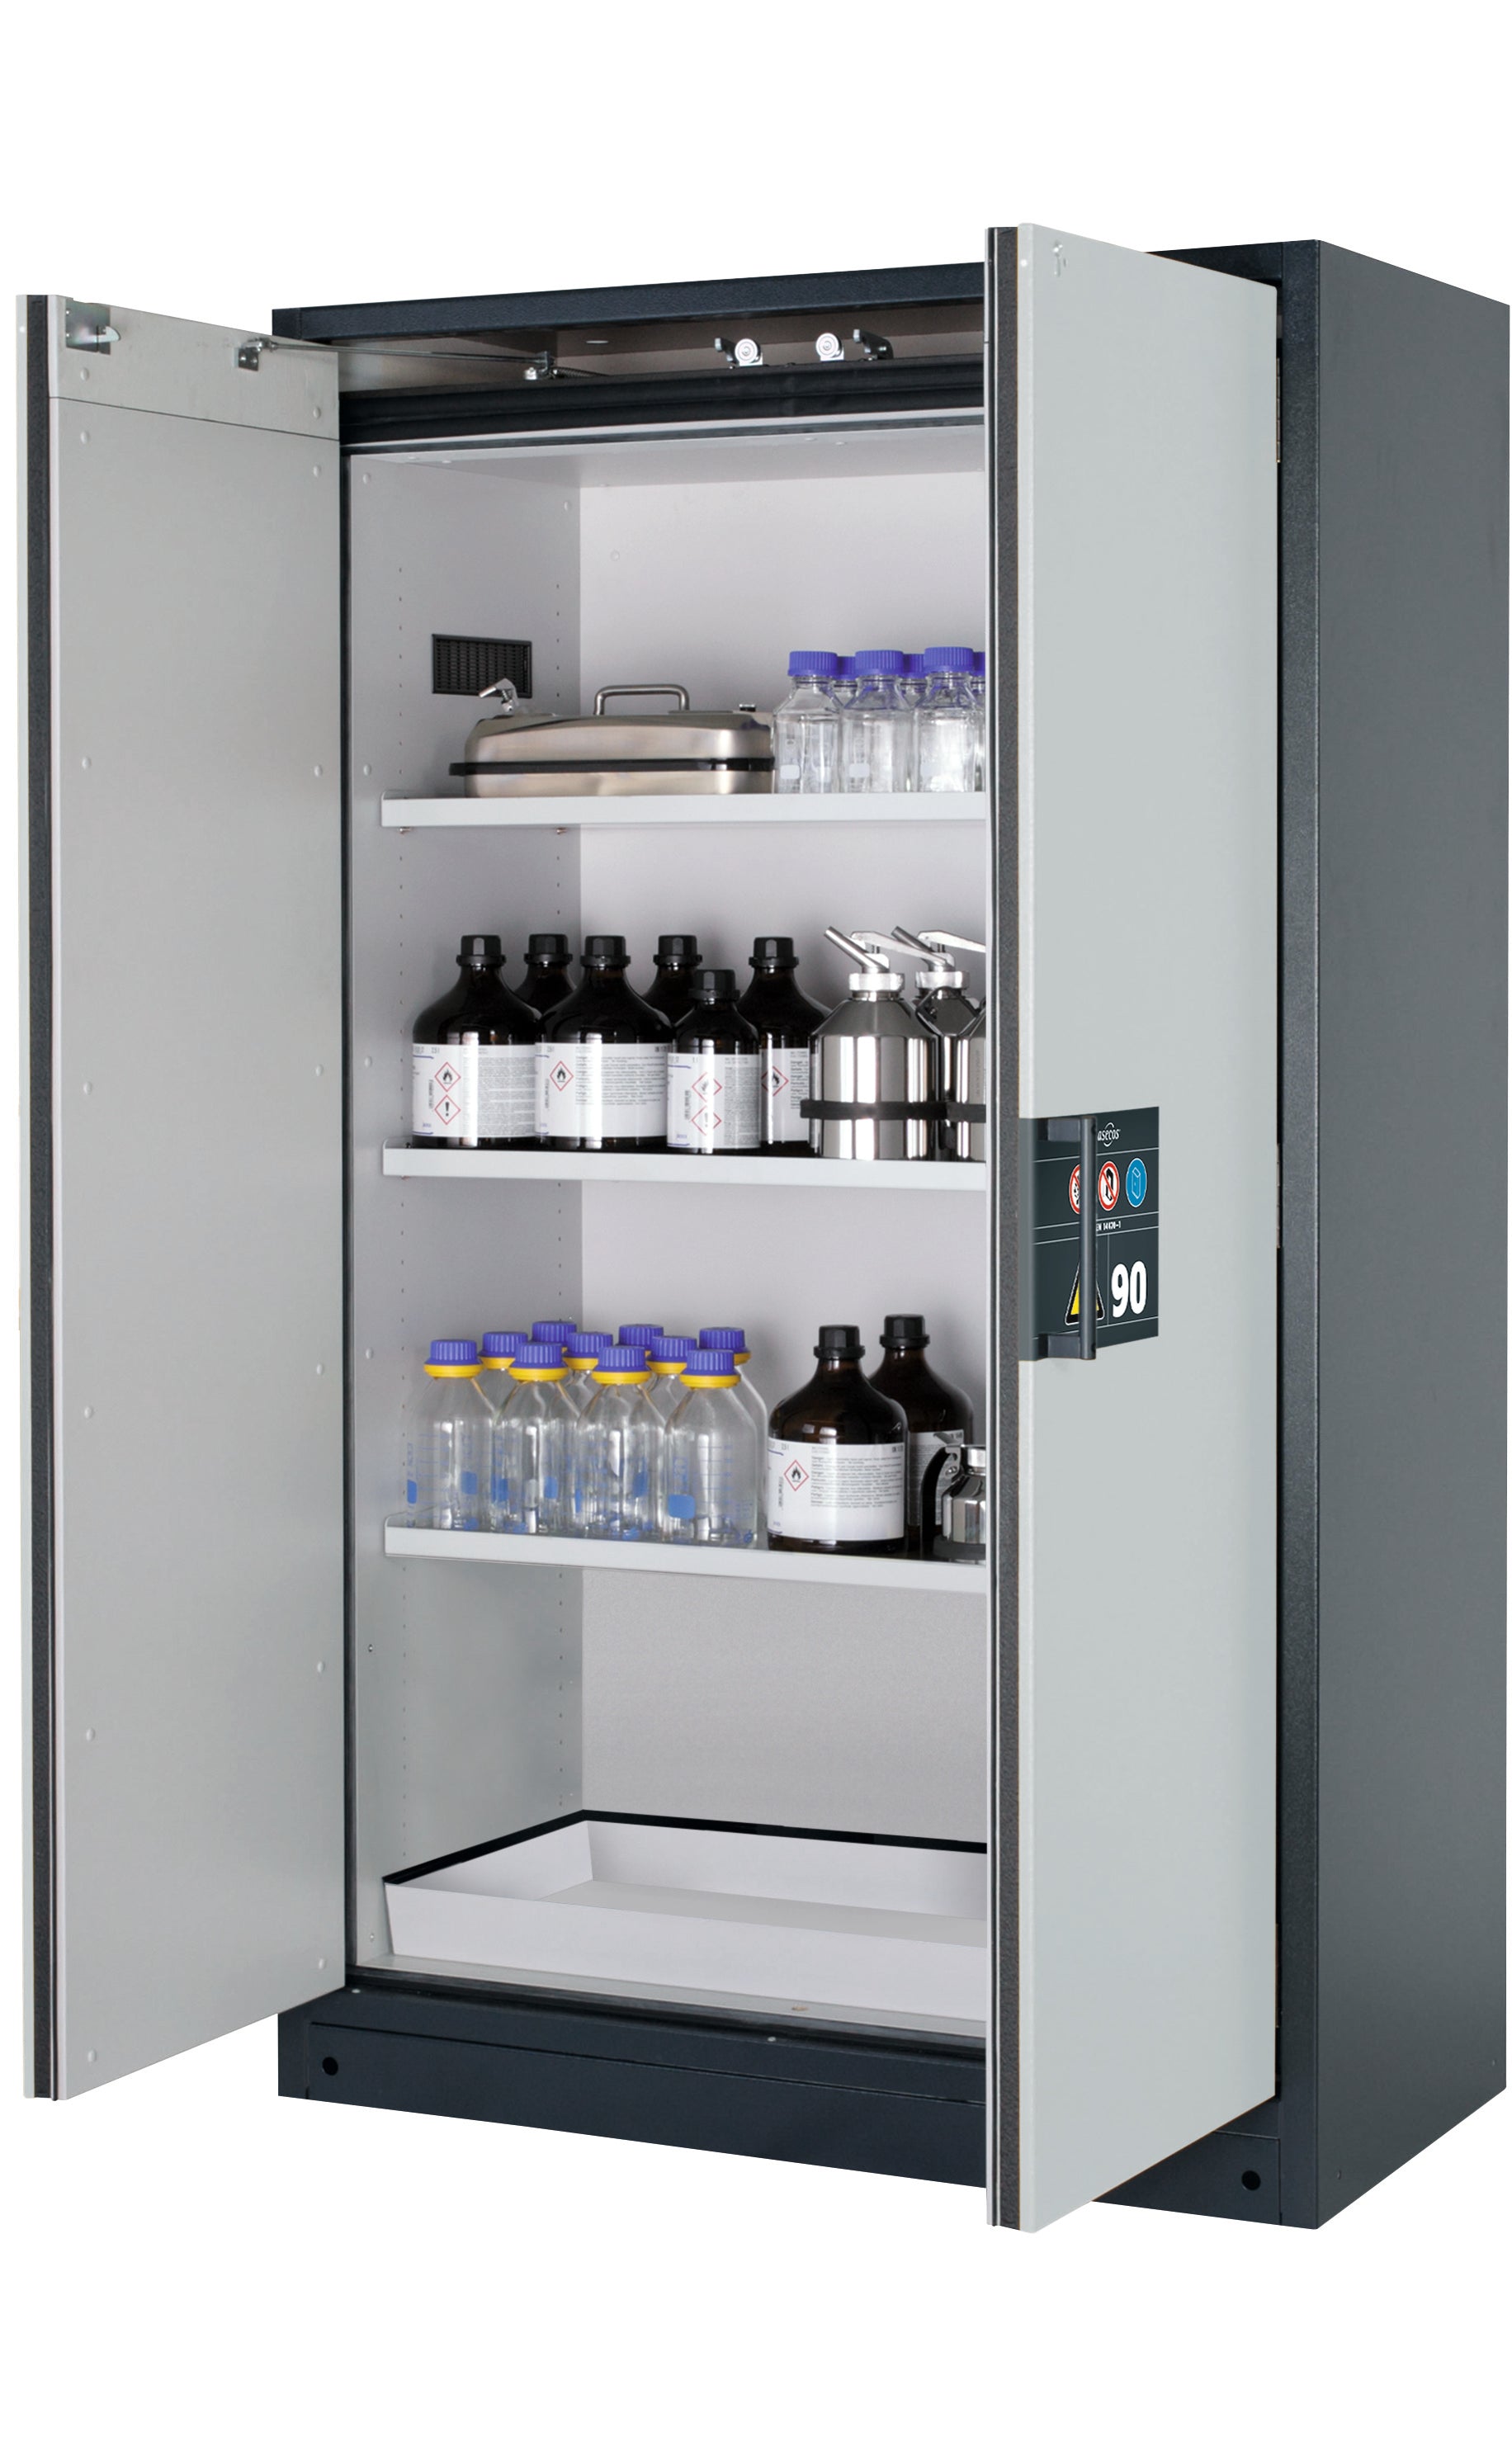 Type 90 safety storage cabinet Q-CLASSIC-90 model Q90.195.120 in light grey RAL 7035 with 3x shelf standard (sheet steel),